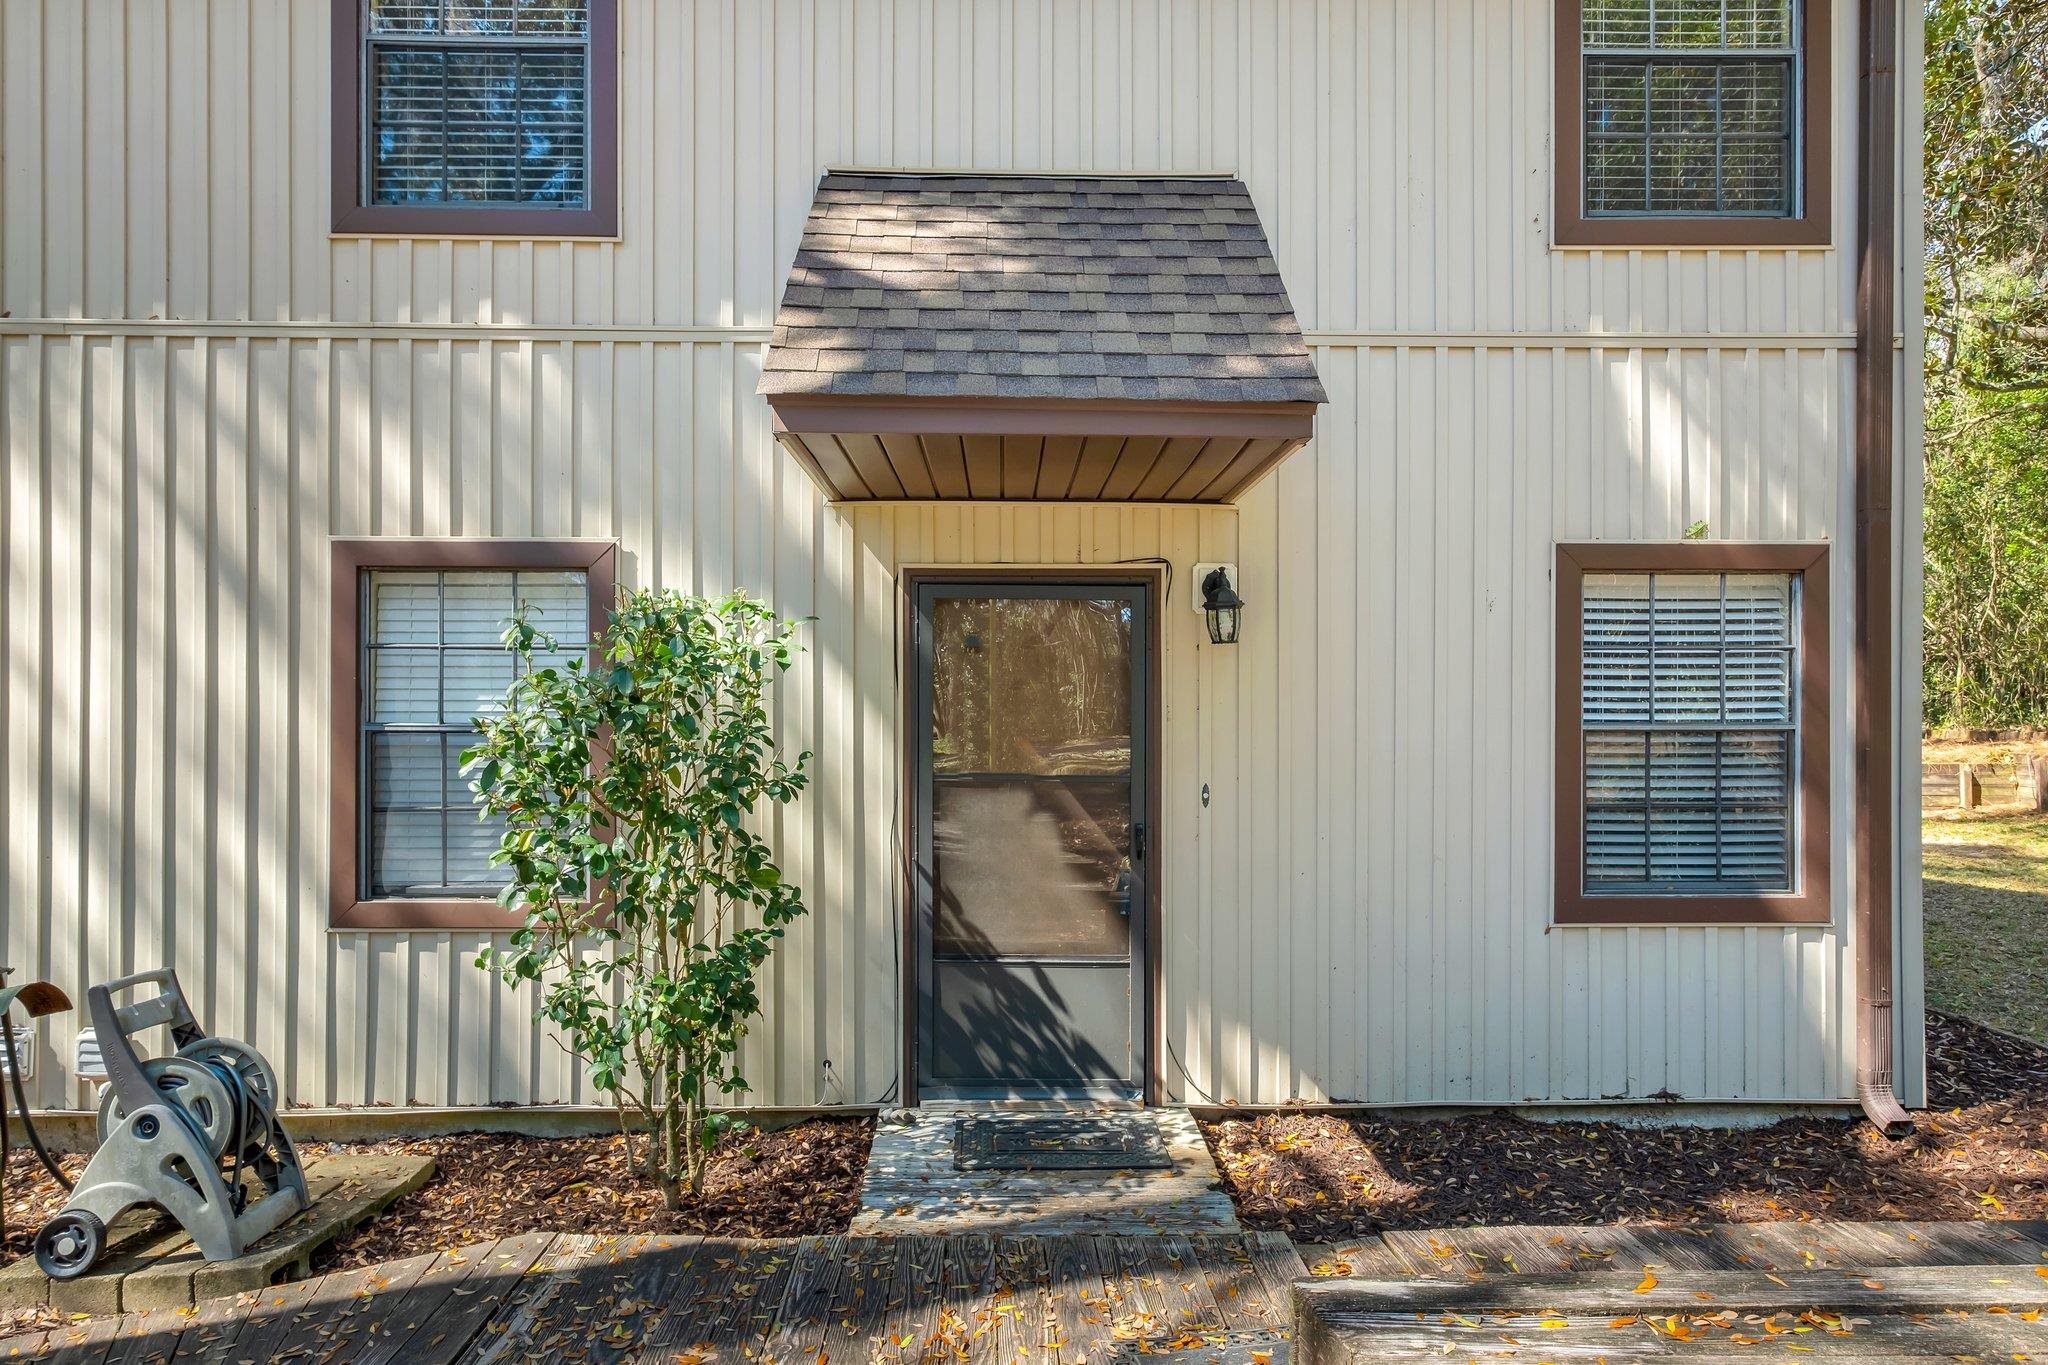 4176 Brewster,TALLAHASSEE,Florida 32308,6 Bedrooms Bedrooms,1 BathroomBathrooms,Multi-family,Brewster,368894